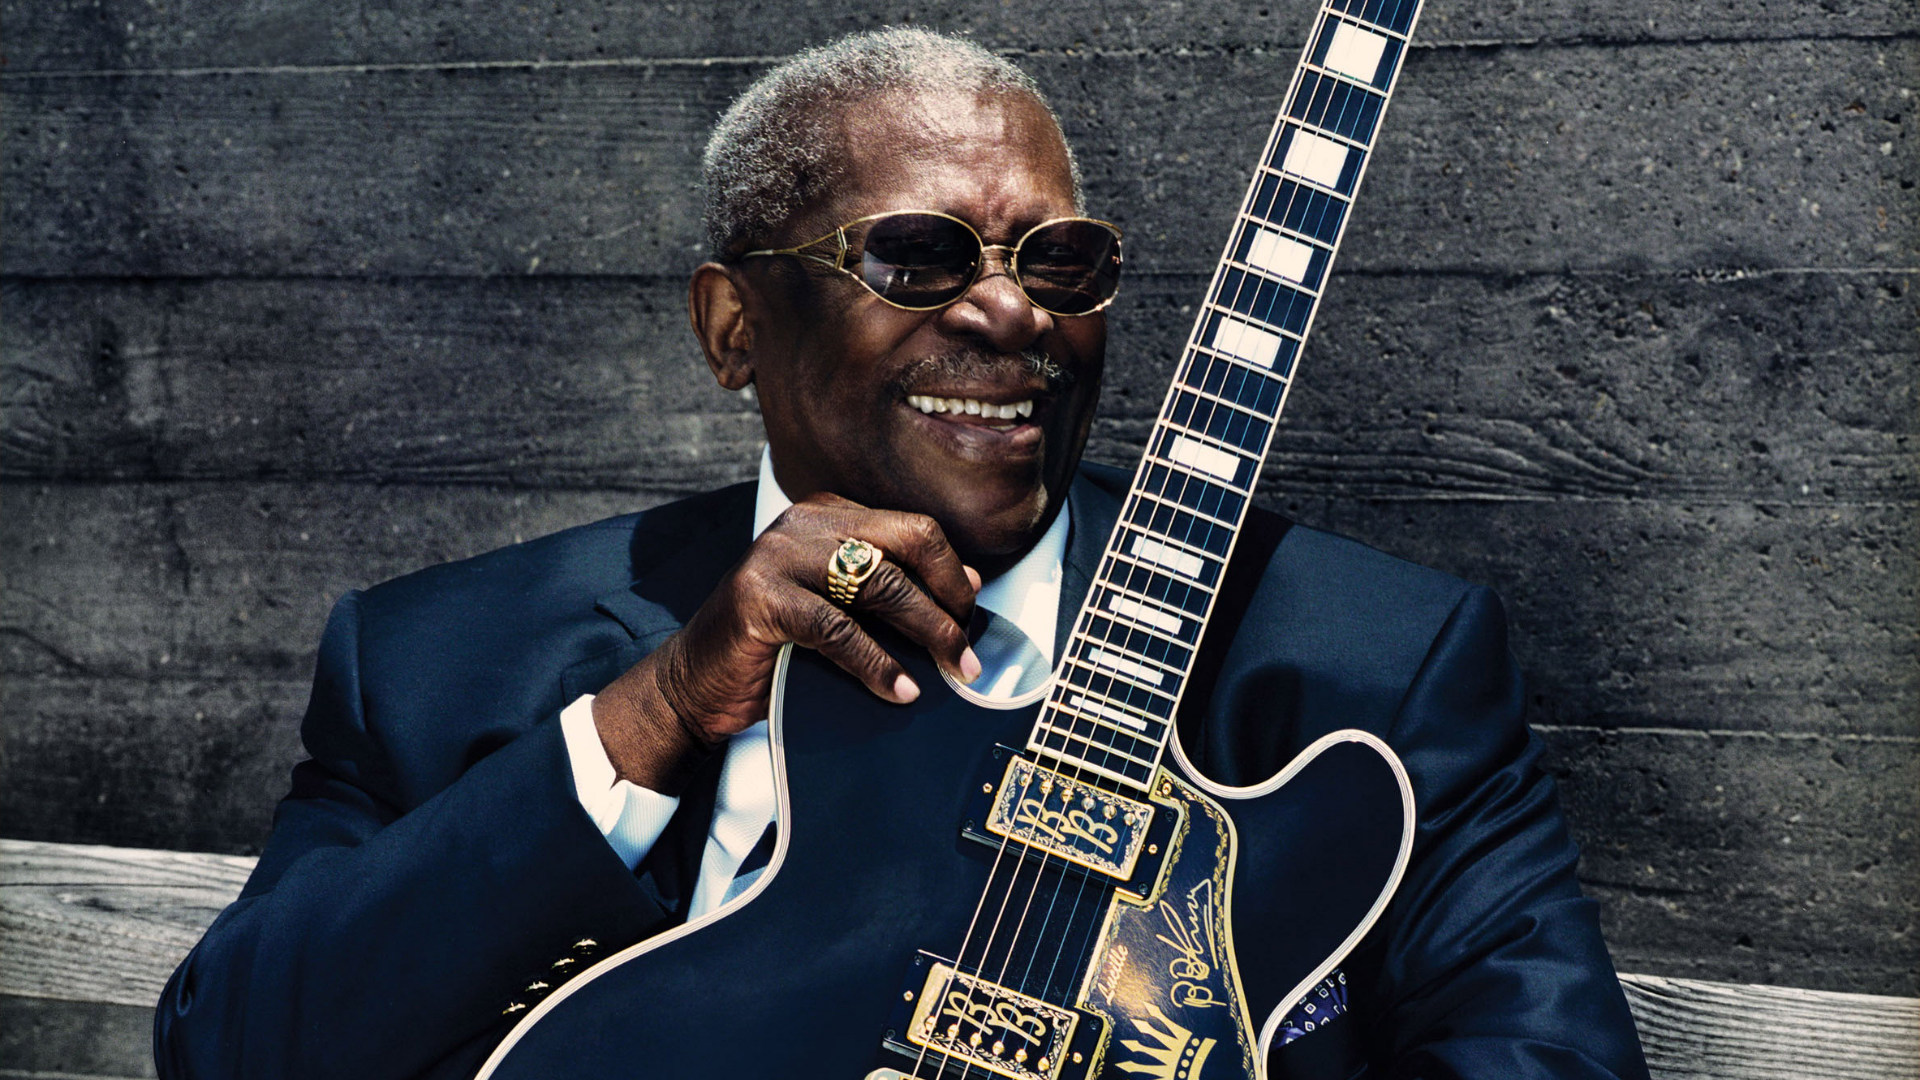 B.B. King death probed as homicide after poison claim: coroner